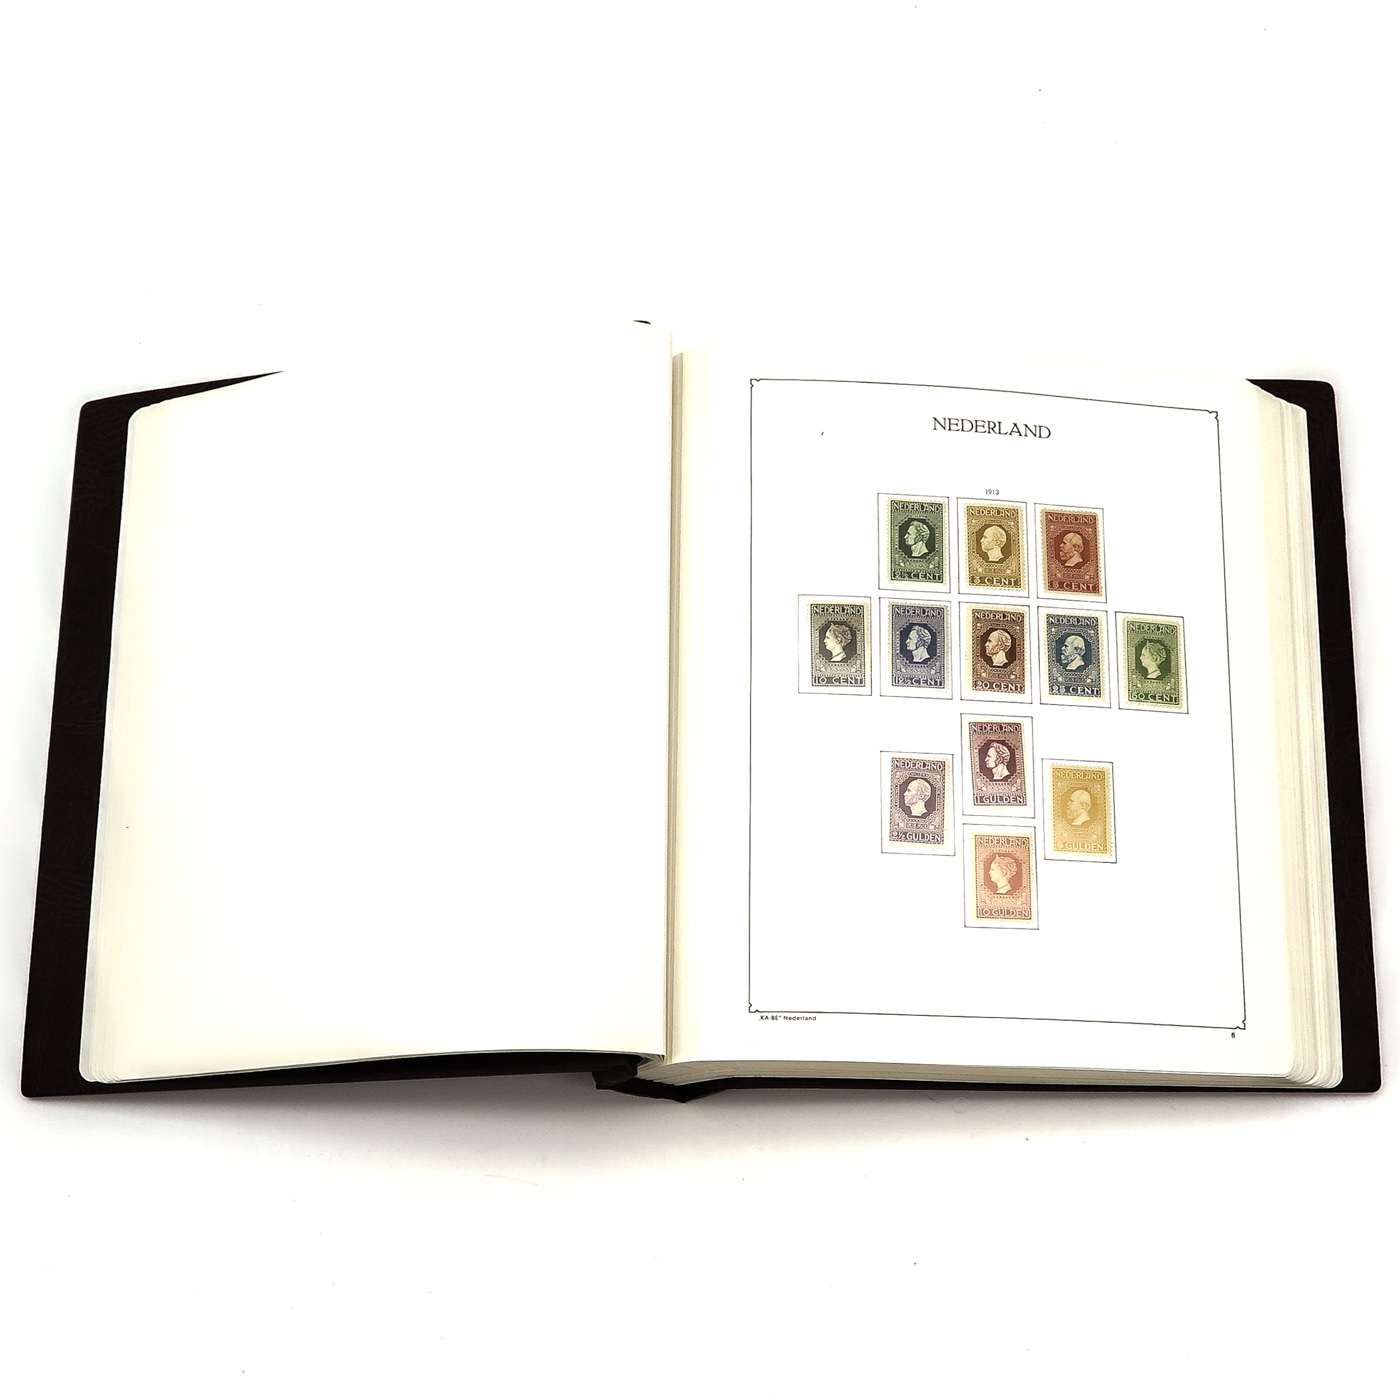 A Very Rare Dutch Stamp Collection - Image 6 of 10